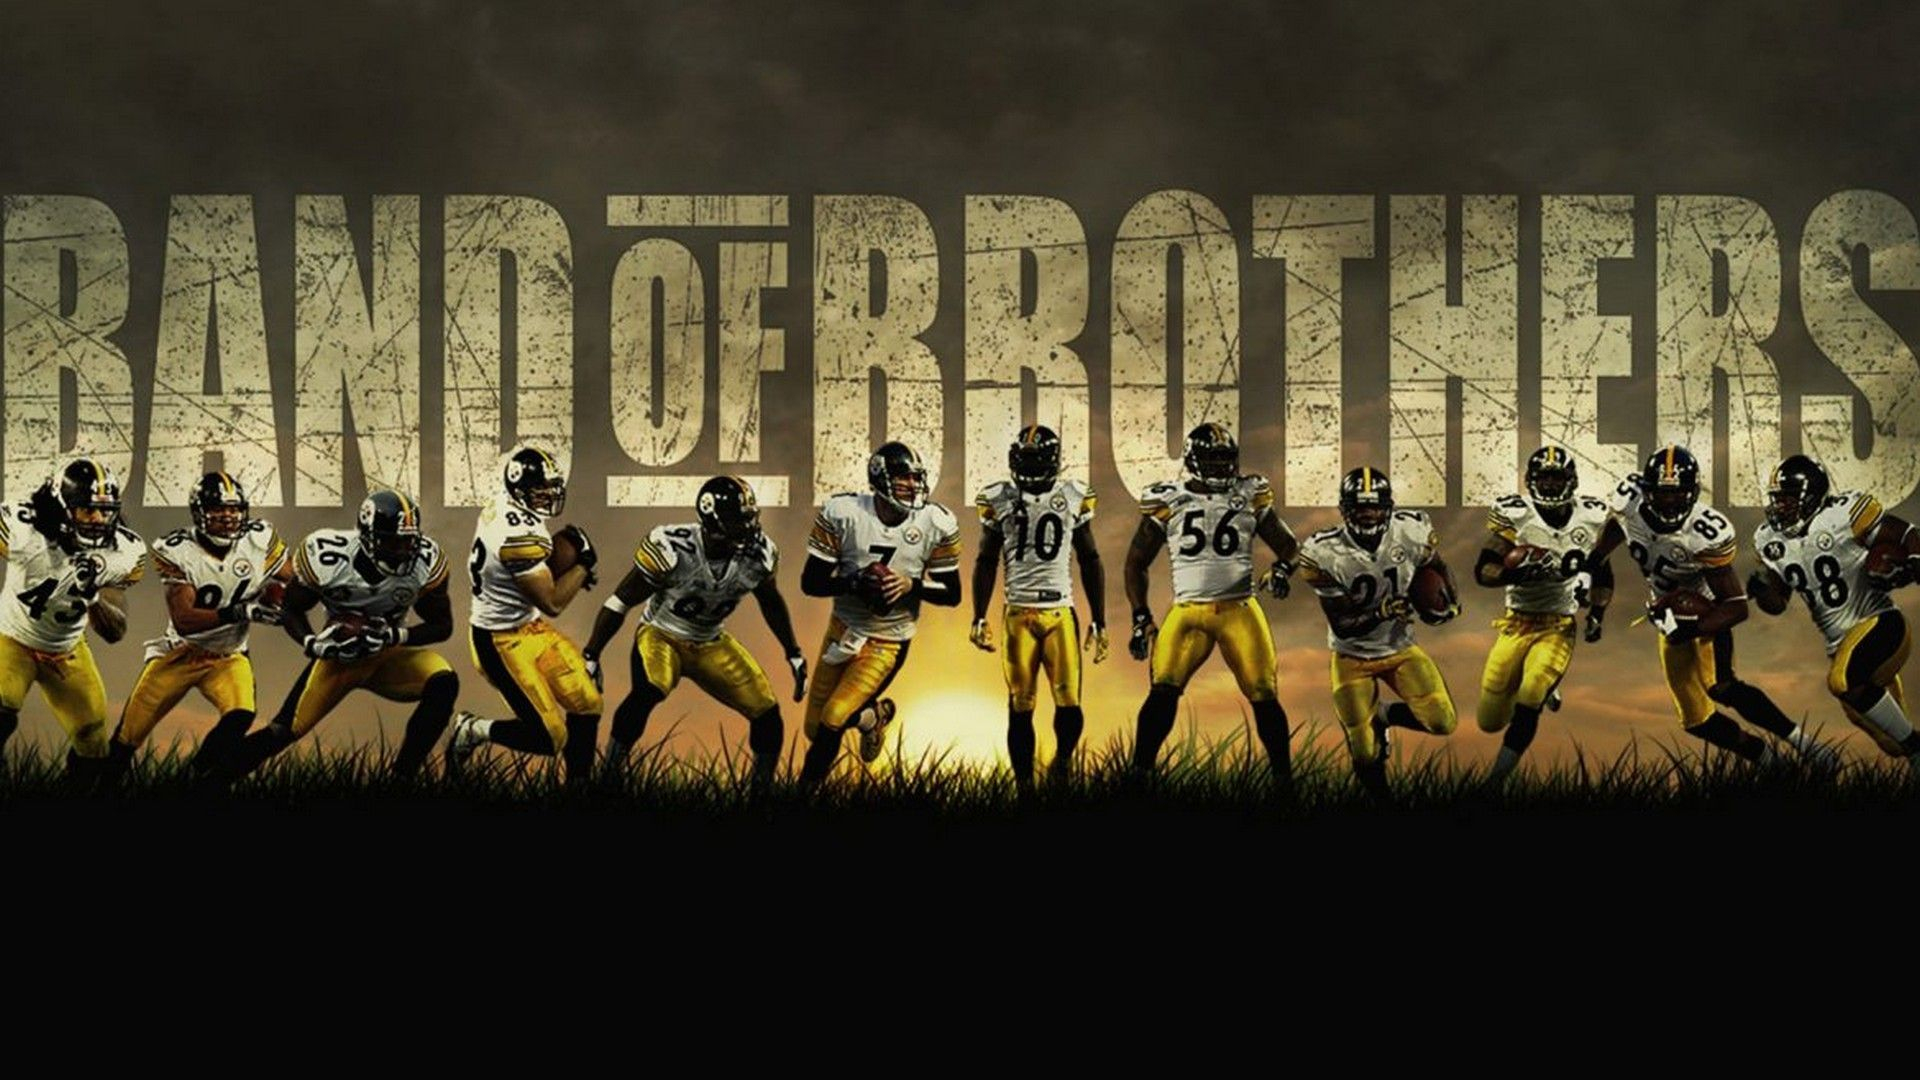 1920x1080 Steelers Football Wallpapers Top Free Steelers Football Backgrounds